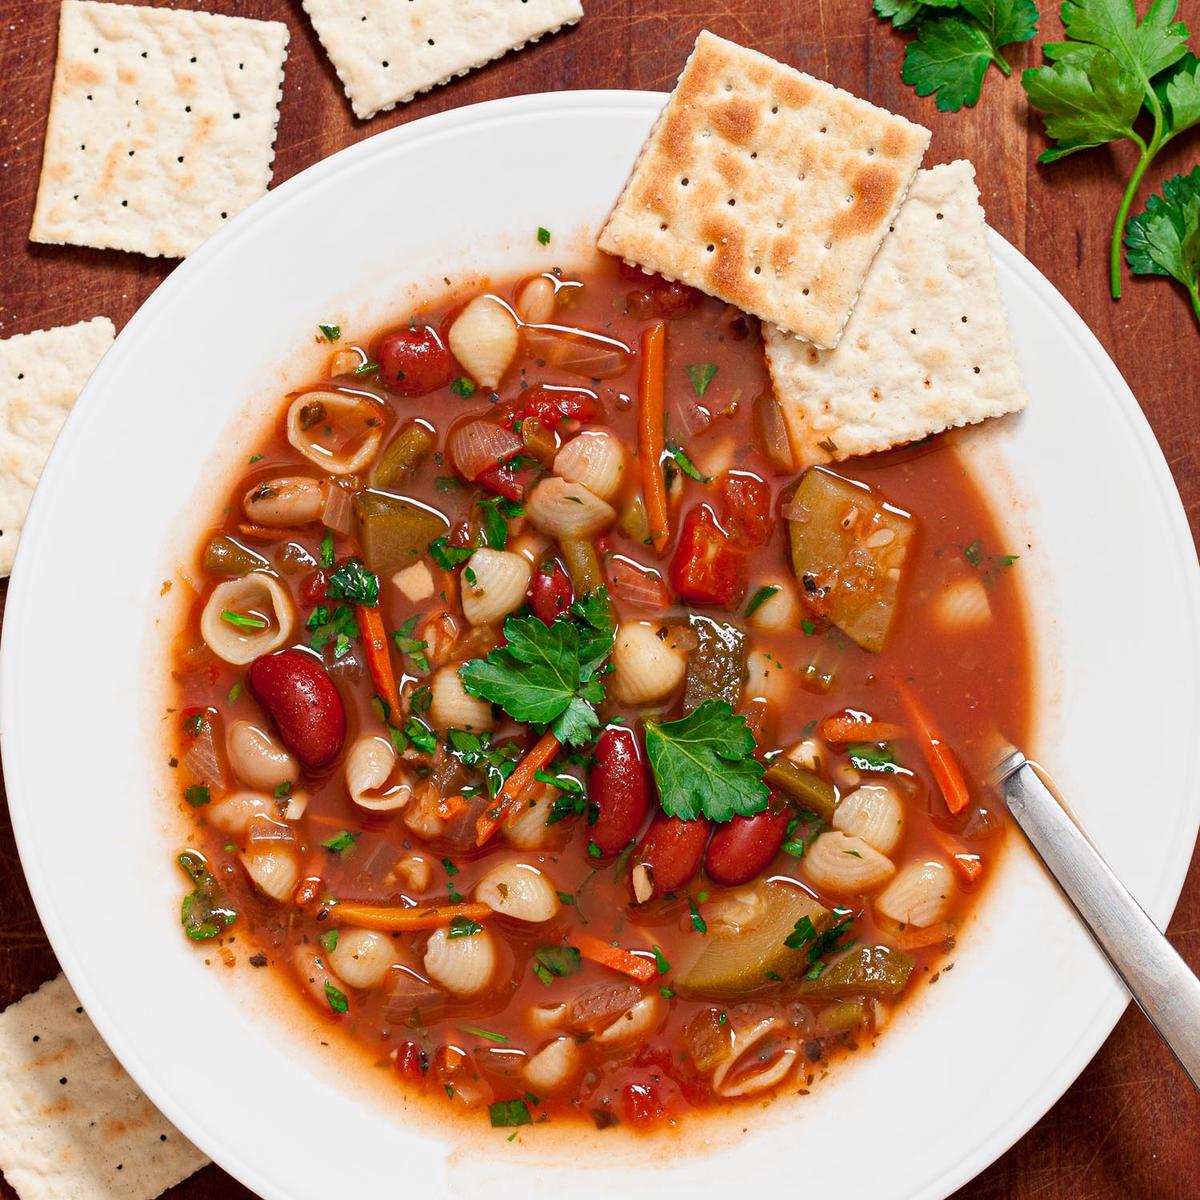 This Olive Garden minestrone soup is perfect for feeding a crowd. (Courtesy of Amy Dong)